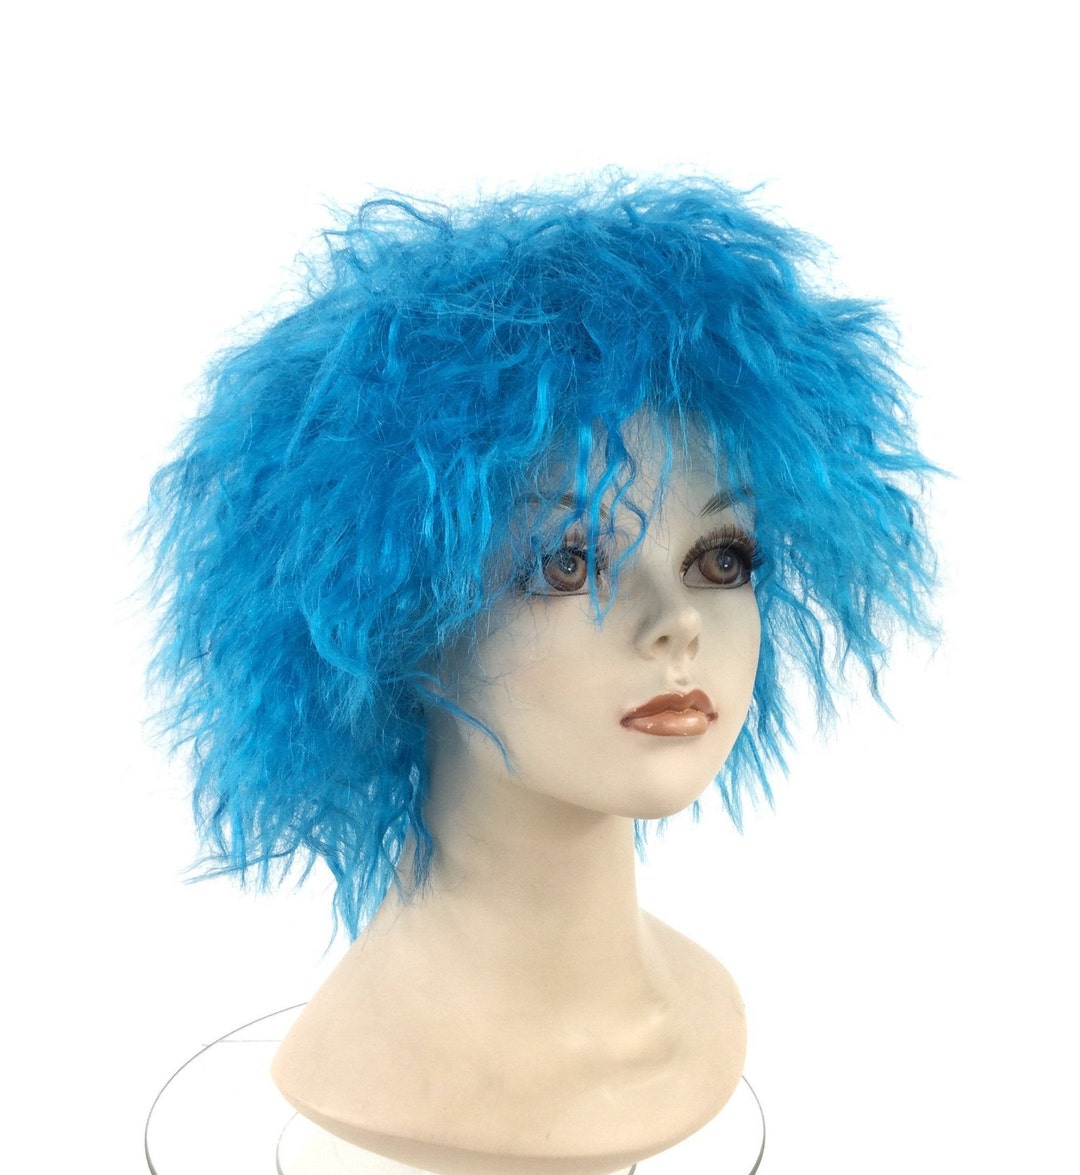 New Thing 1 / Thing 2 Halloween Costume Character Wig by - Etsy